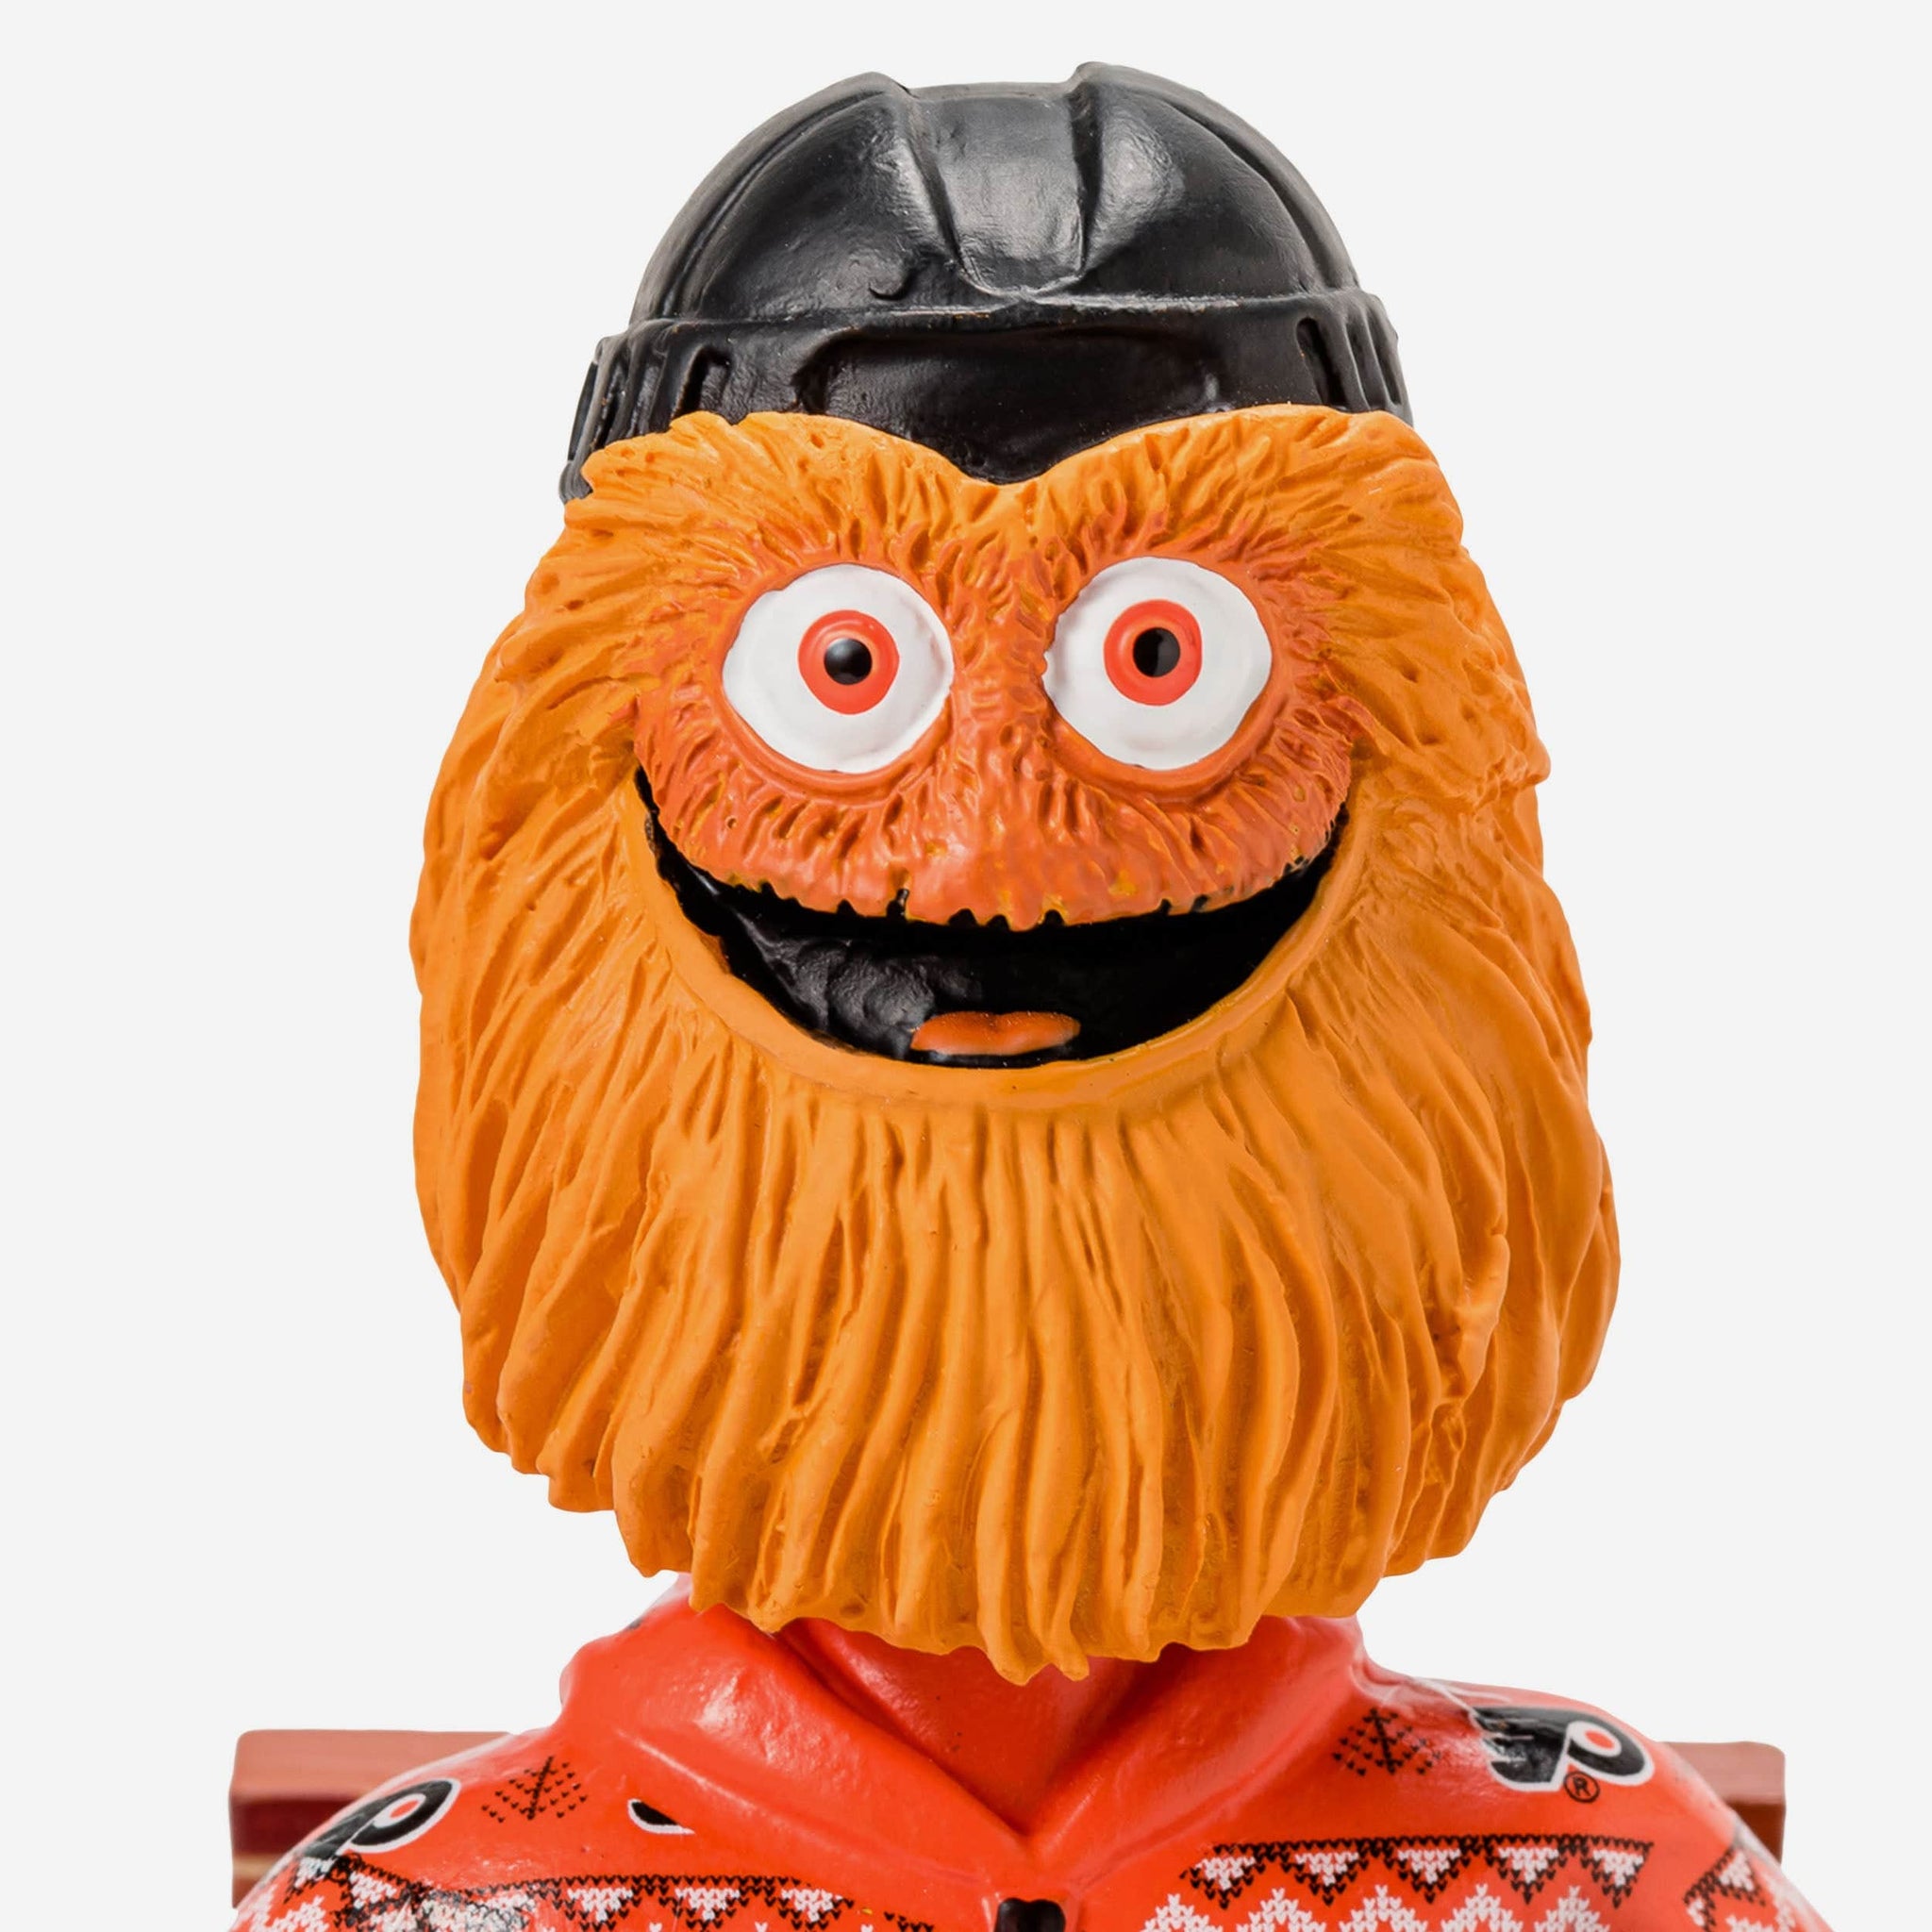 Gritty all year long as Flyers mascot releases 1st calendar